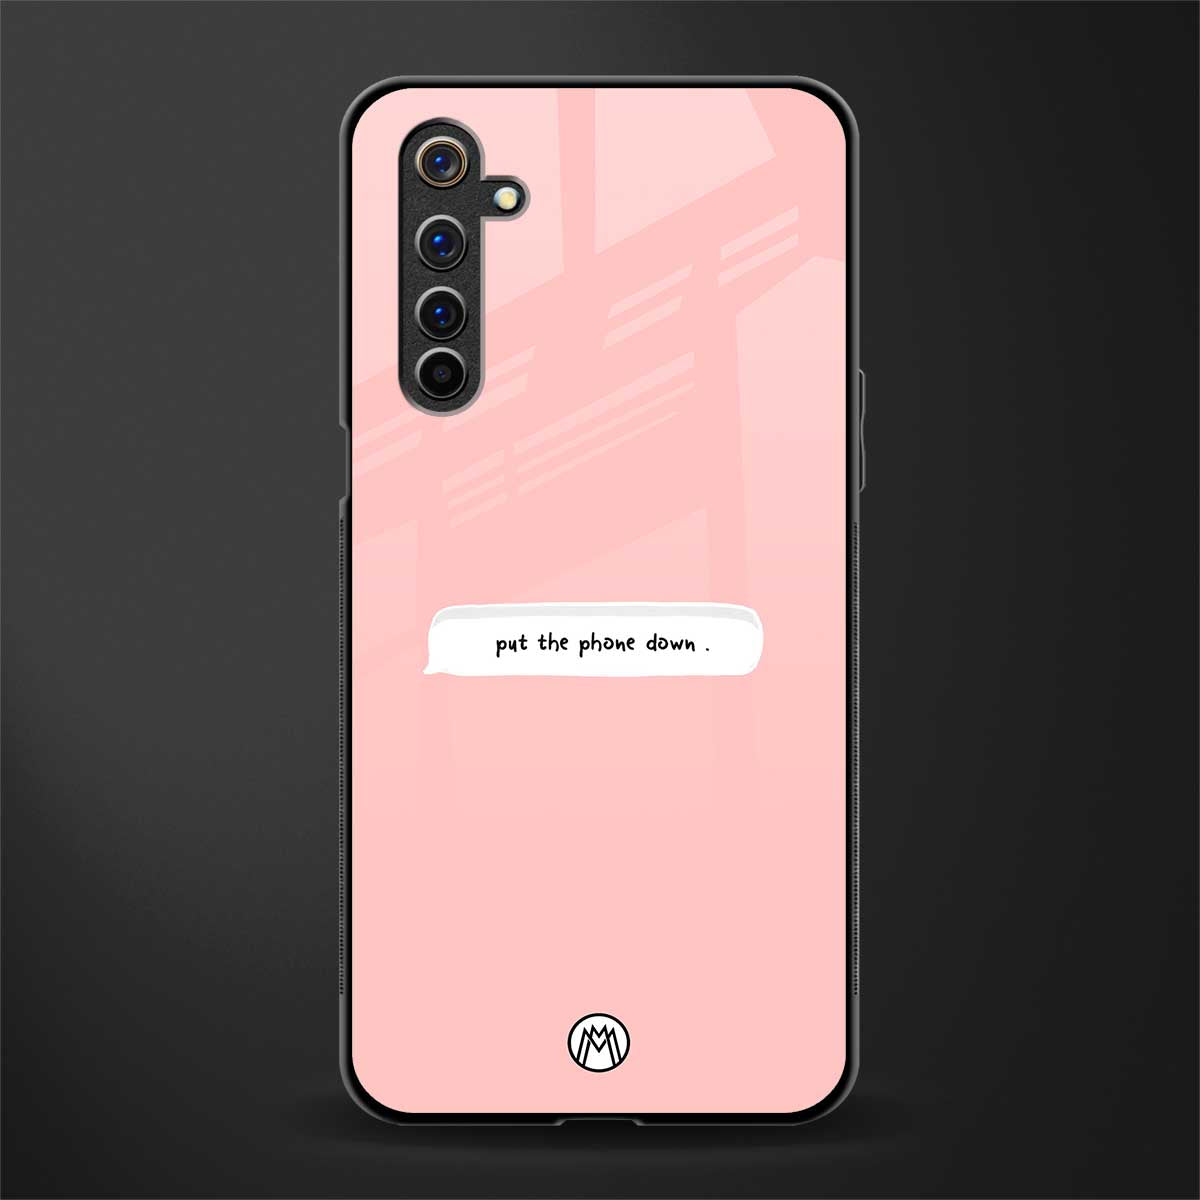 put the phone down glass case for realme 6 pro image